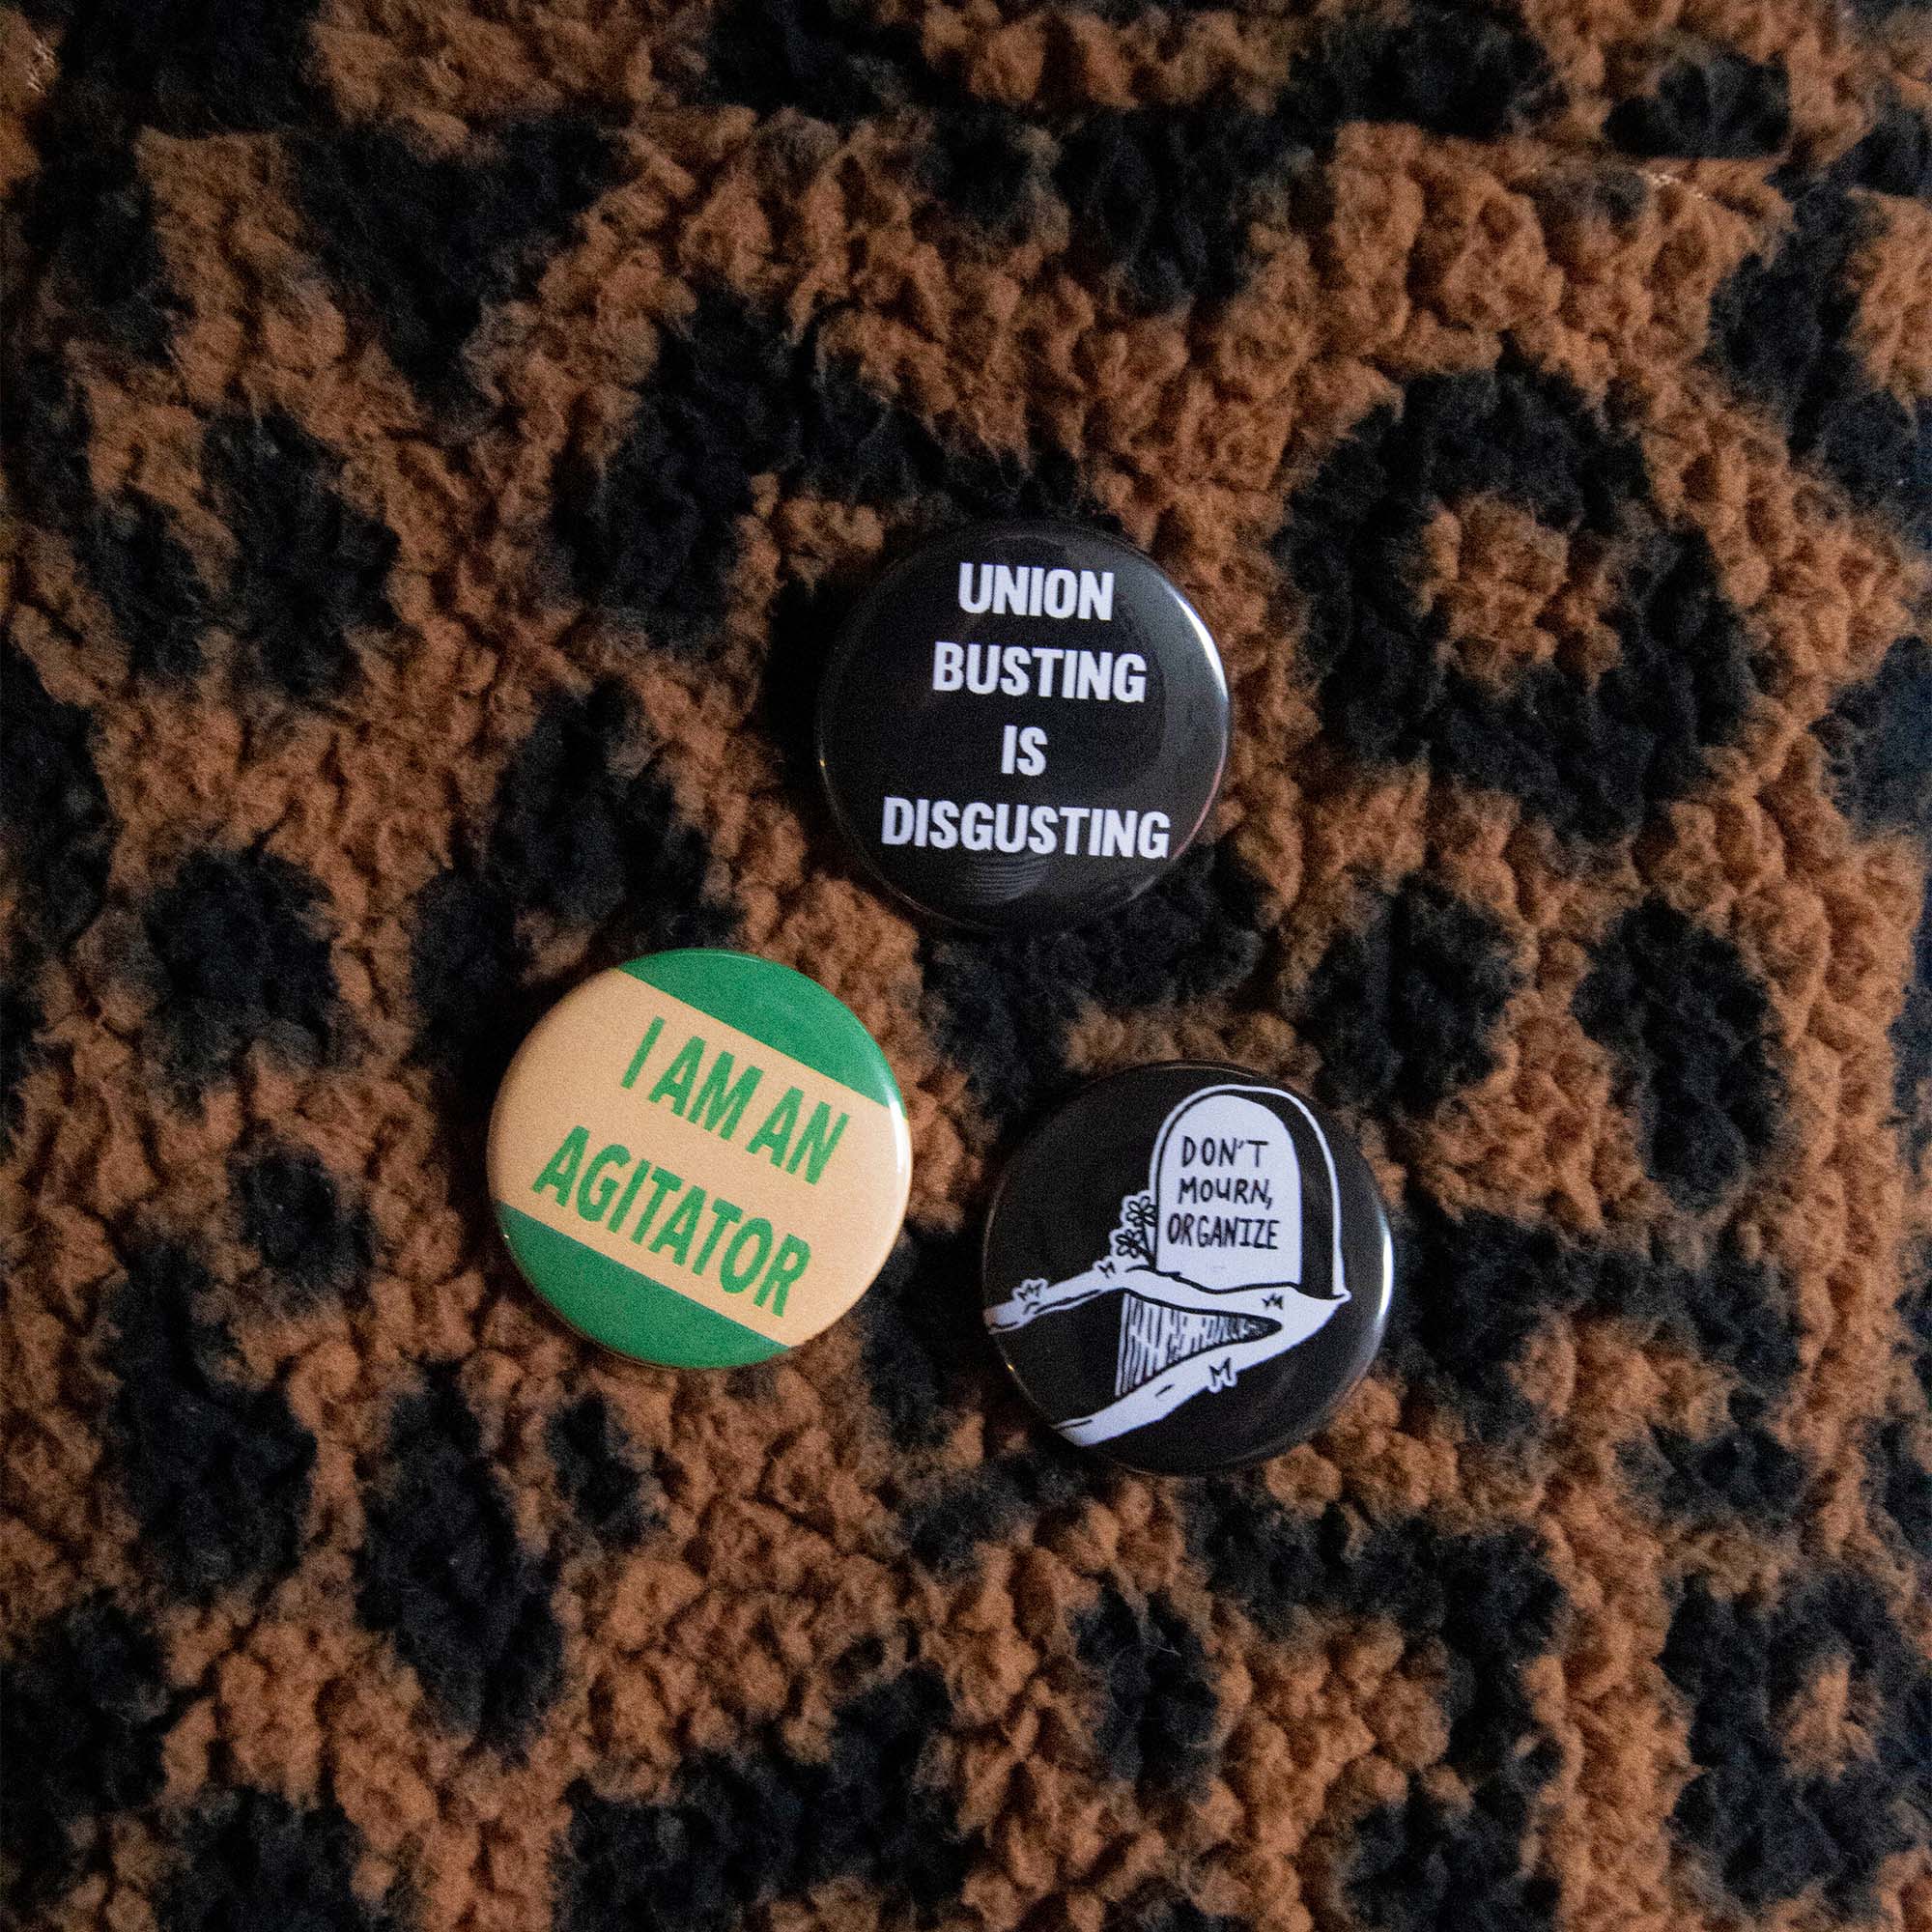 Three pins on a rug. 1. I am an agitator, 2. Don't mourn, organize, 3. Union busting is disgusting